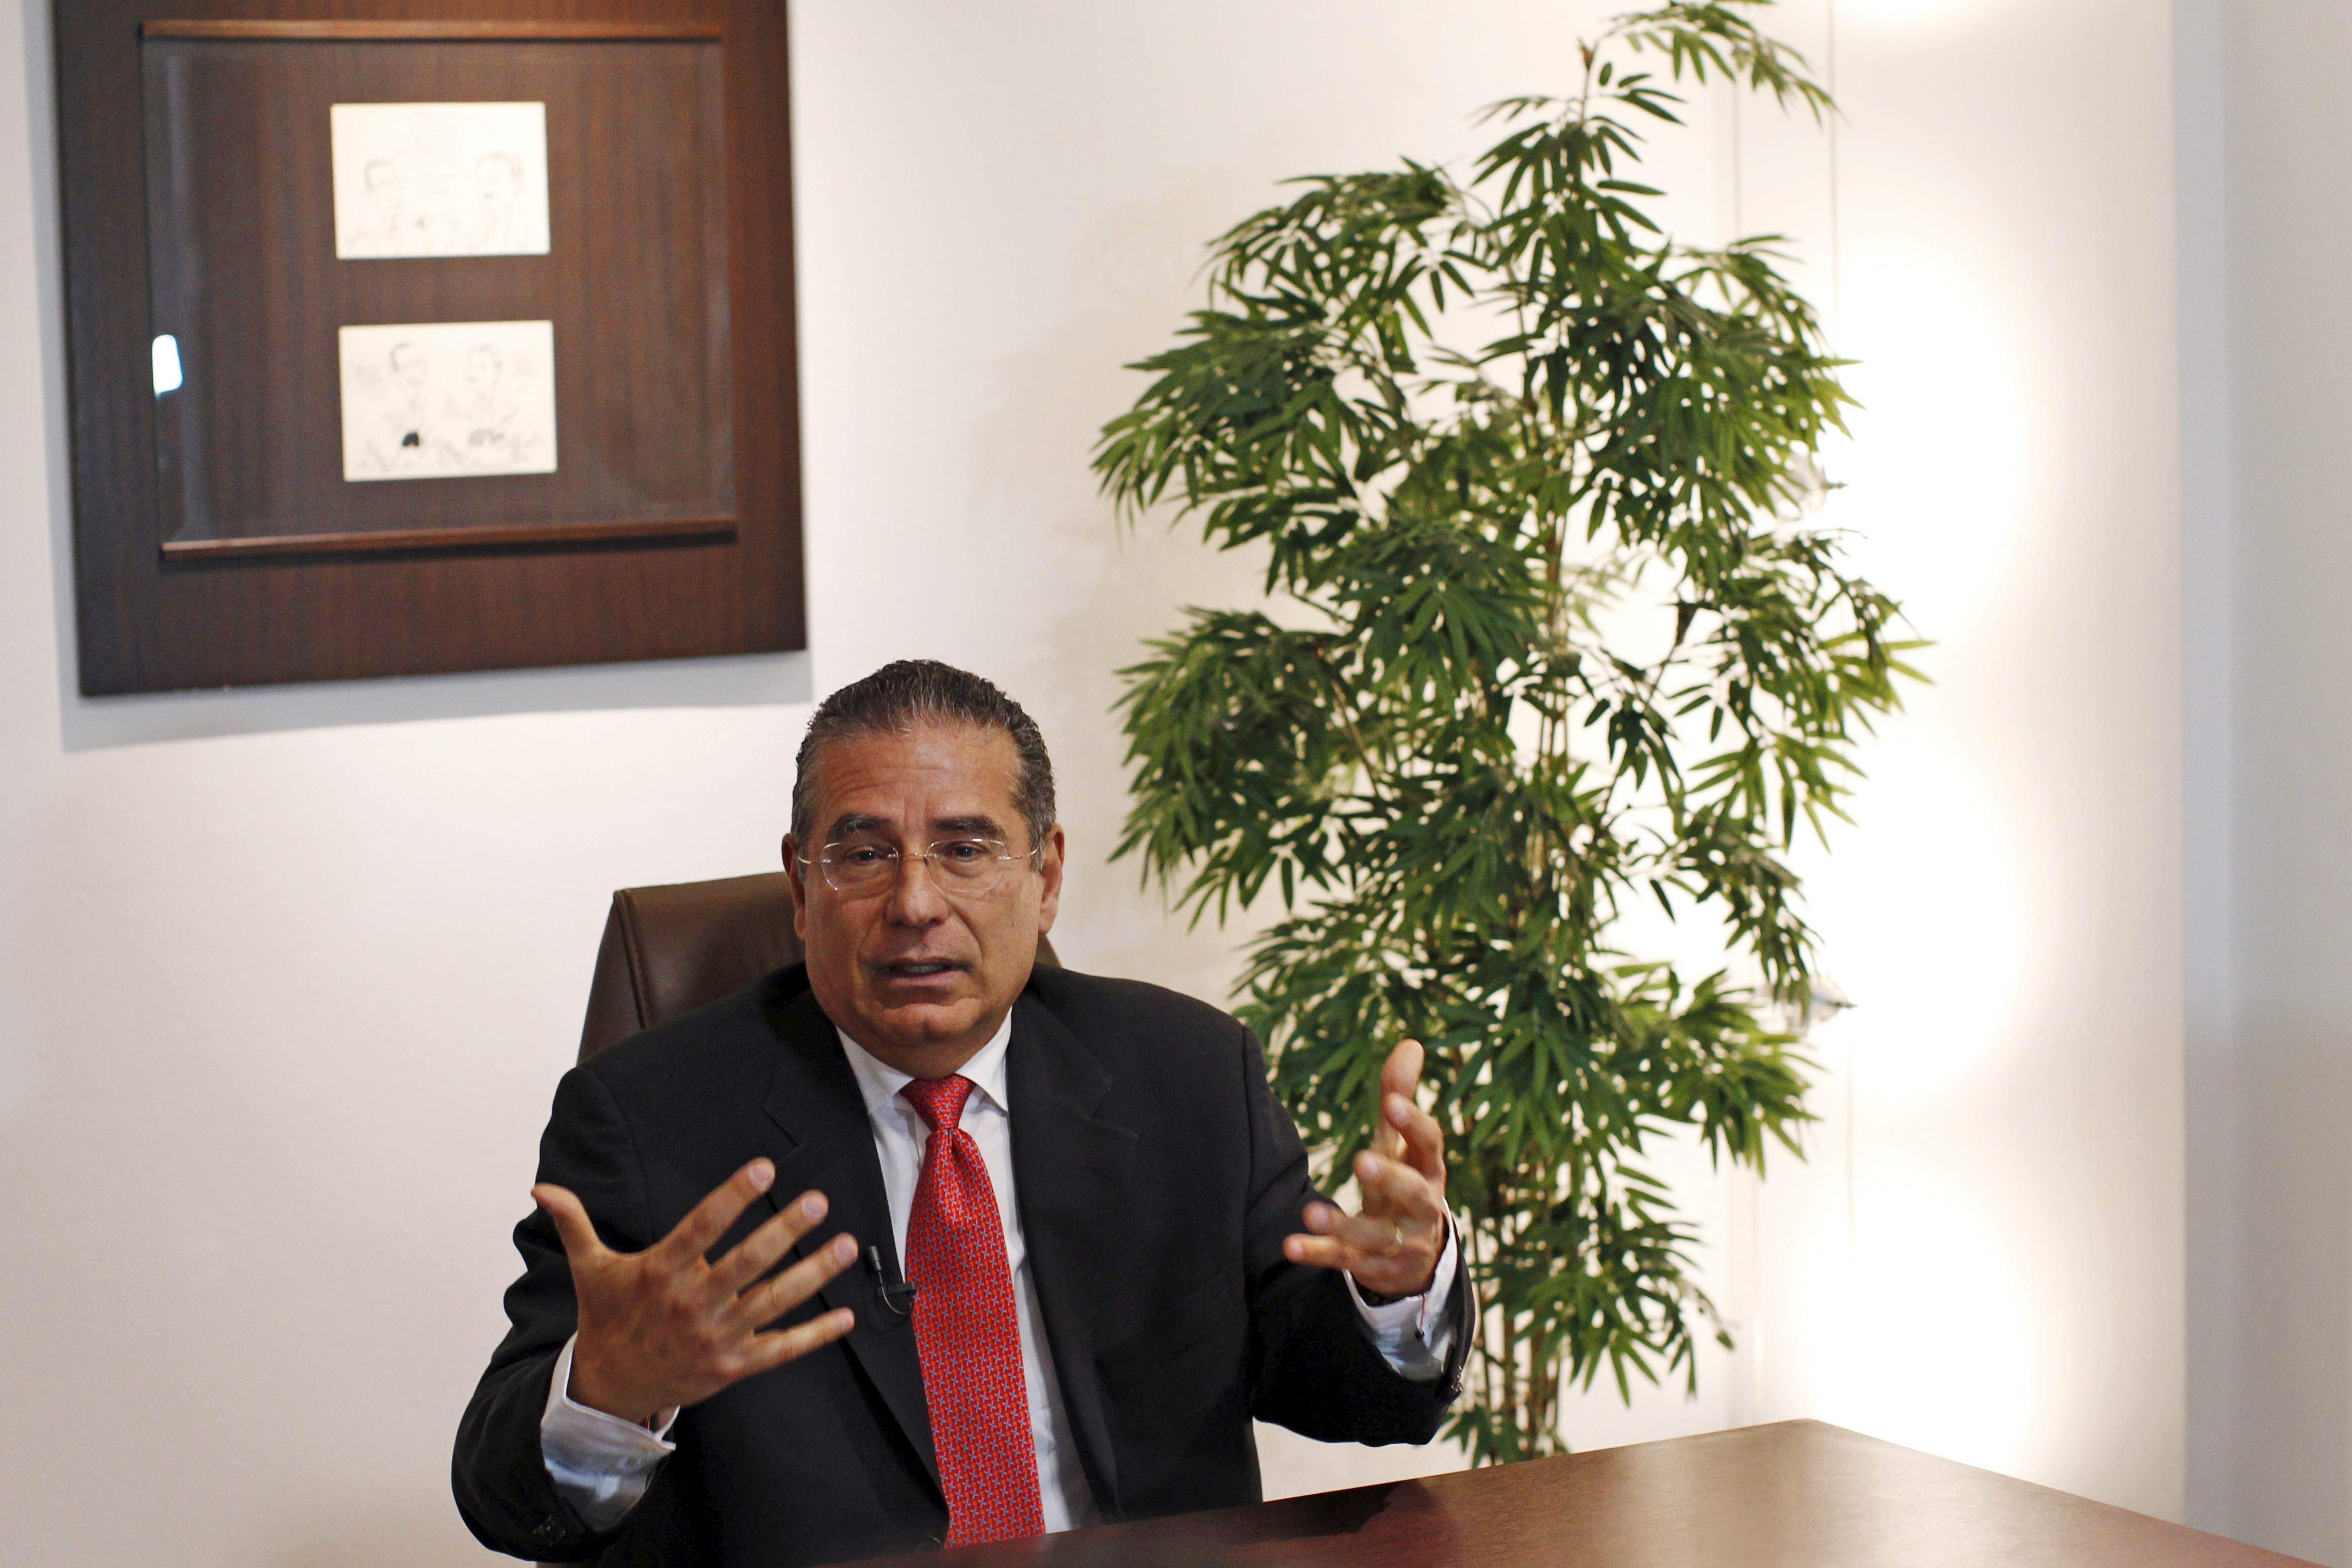 Ramon Fonseca, founding partner of law firm Mossack Fonseca, speaks during an interview with Reuters at his office in Panama City